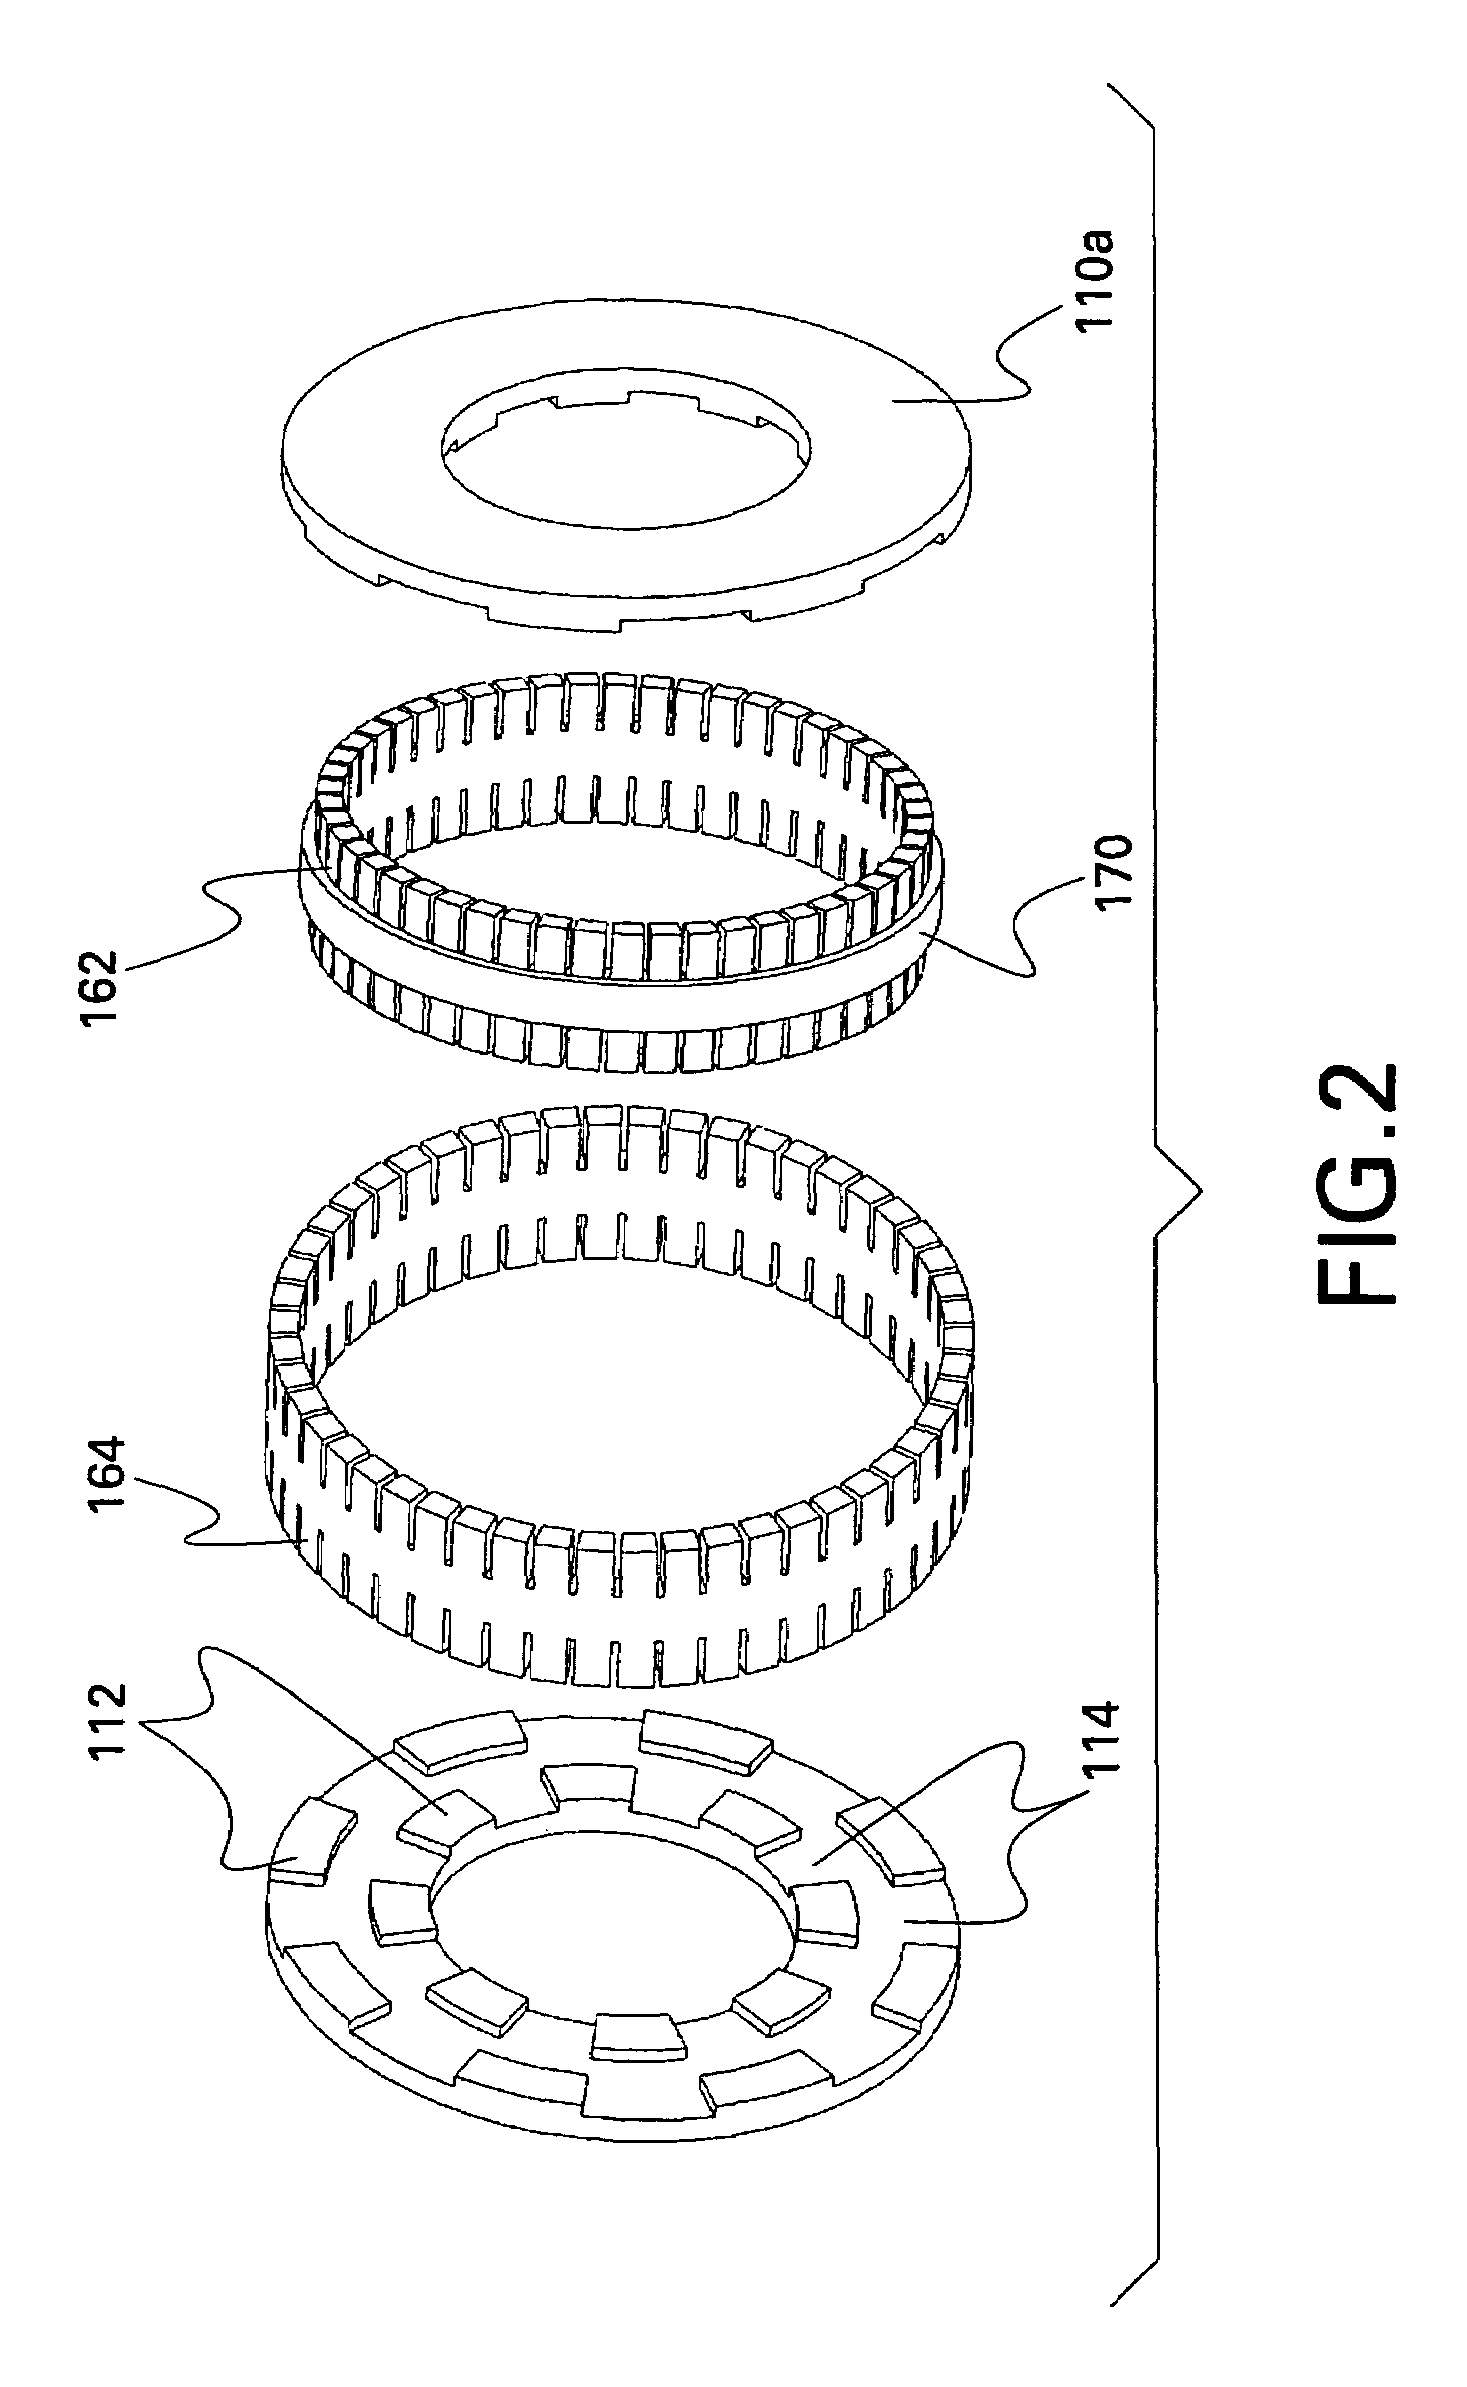 Superconducting rotating machines with stationary field coils and axial airgap flux